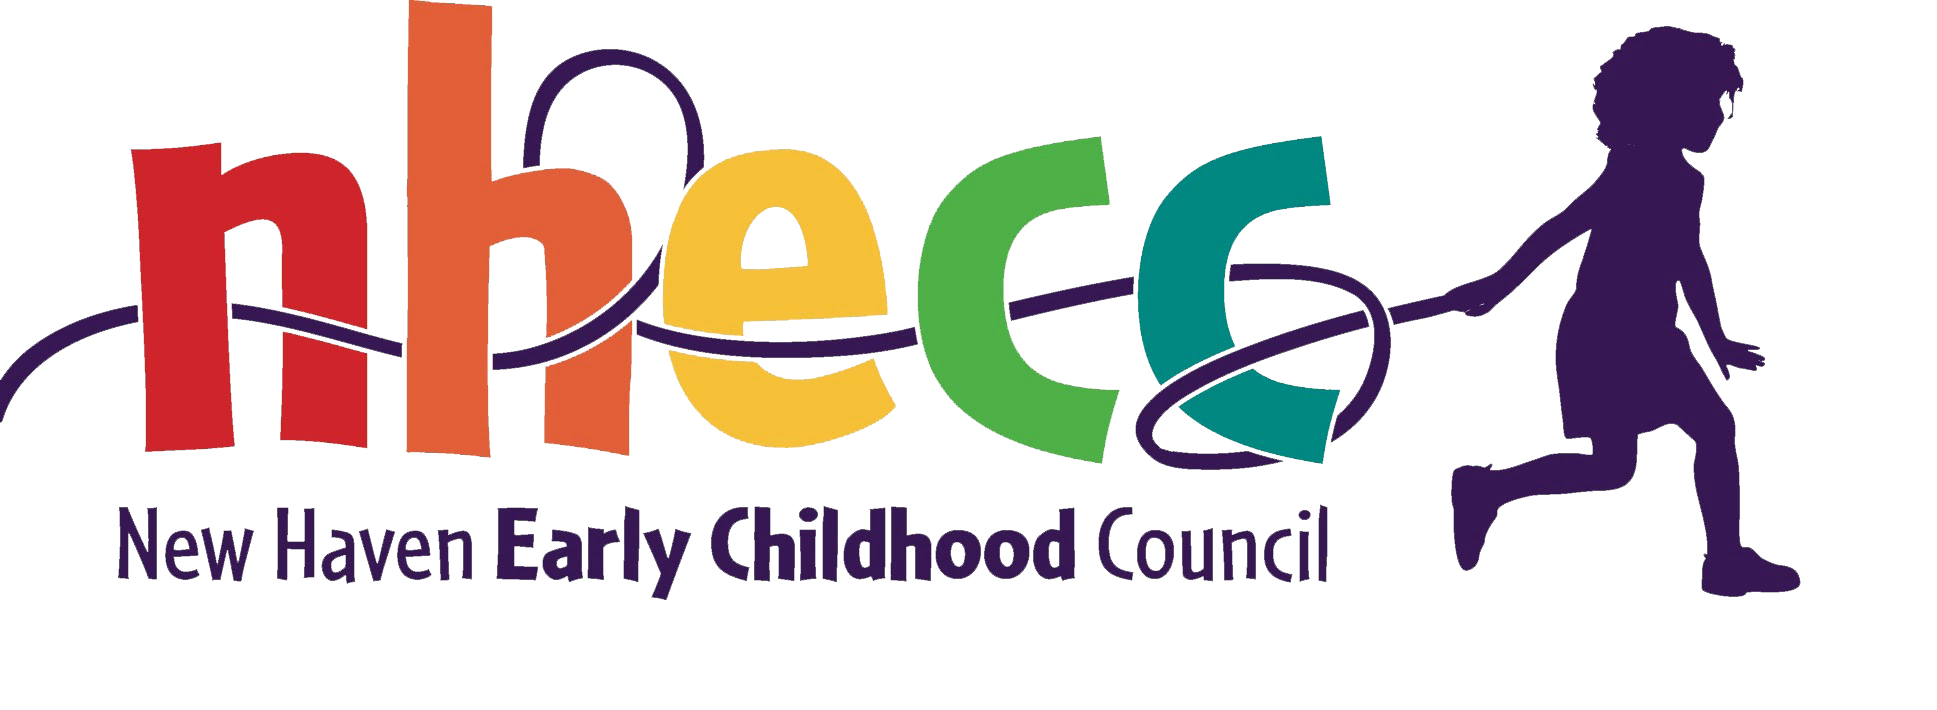 New Haven Early Childhood Council